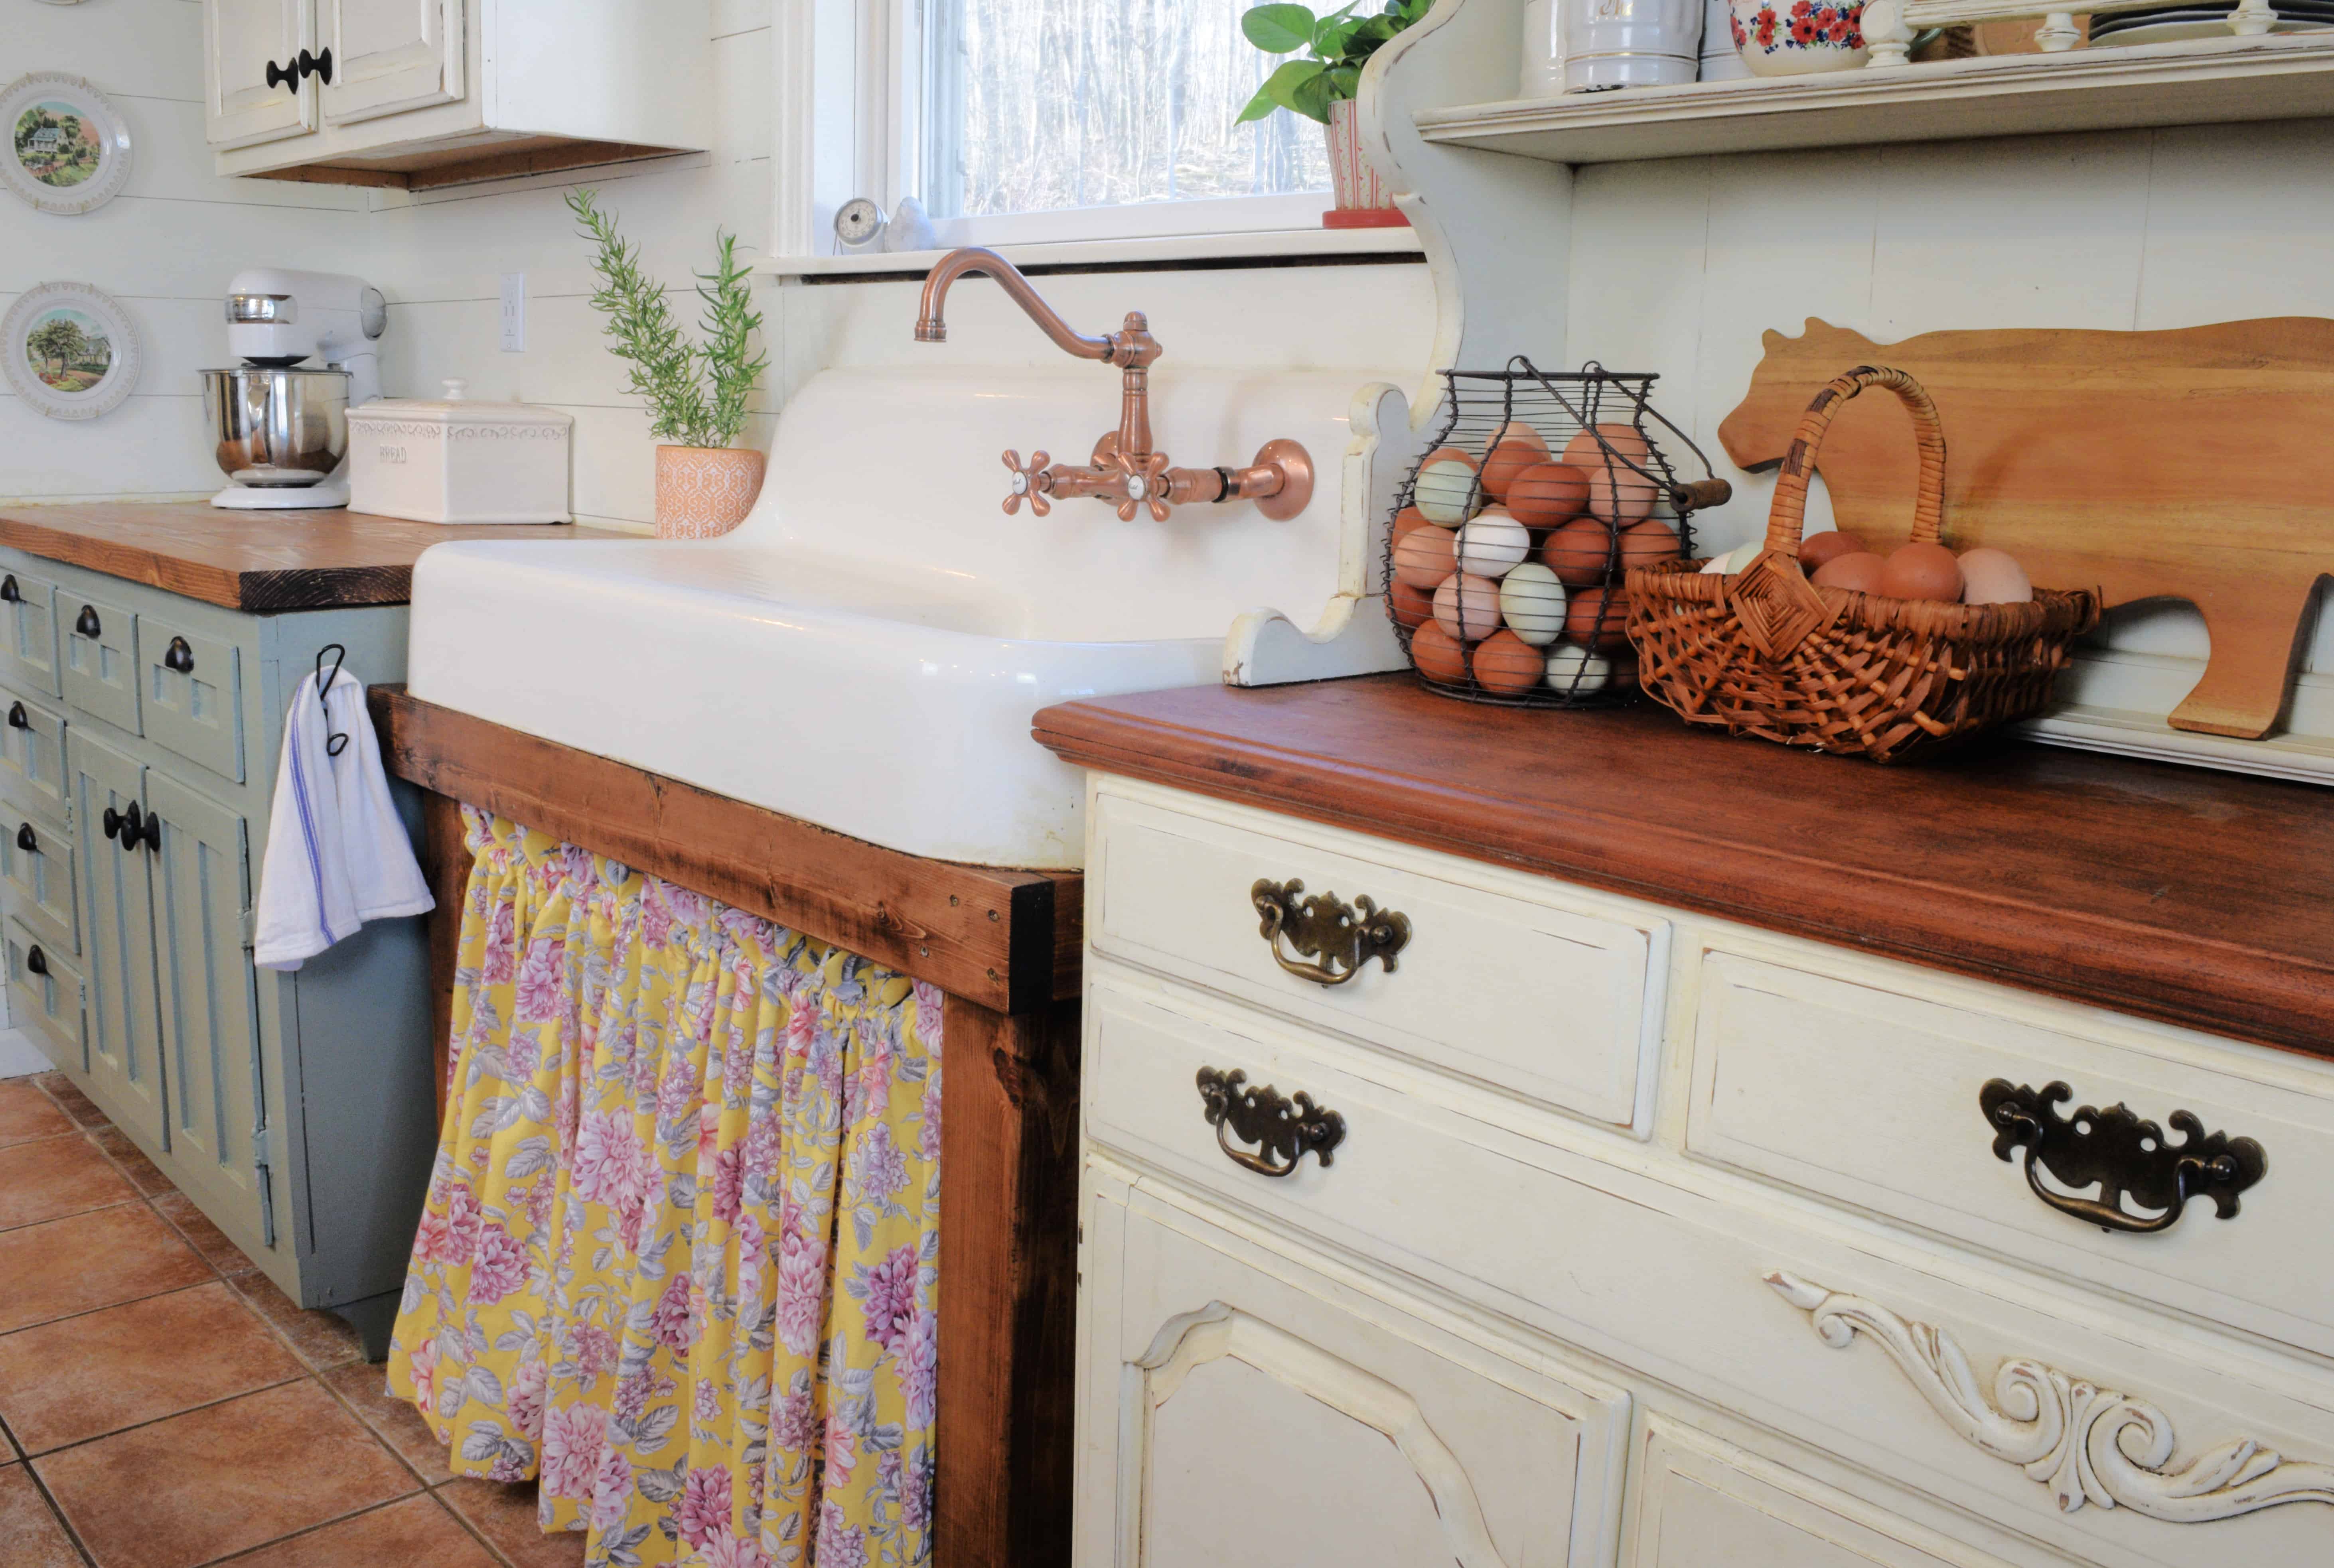 How To Make An Easy DIY Sink Skirt For Your Home